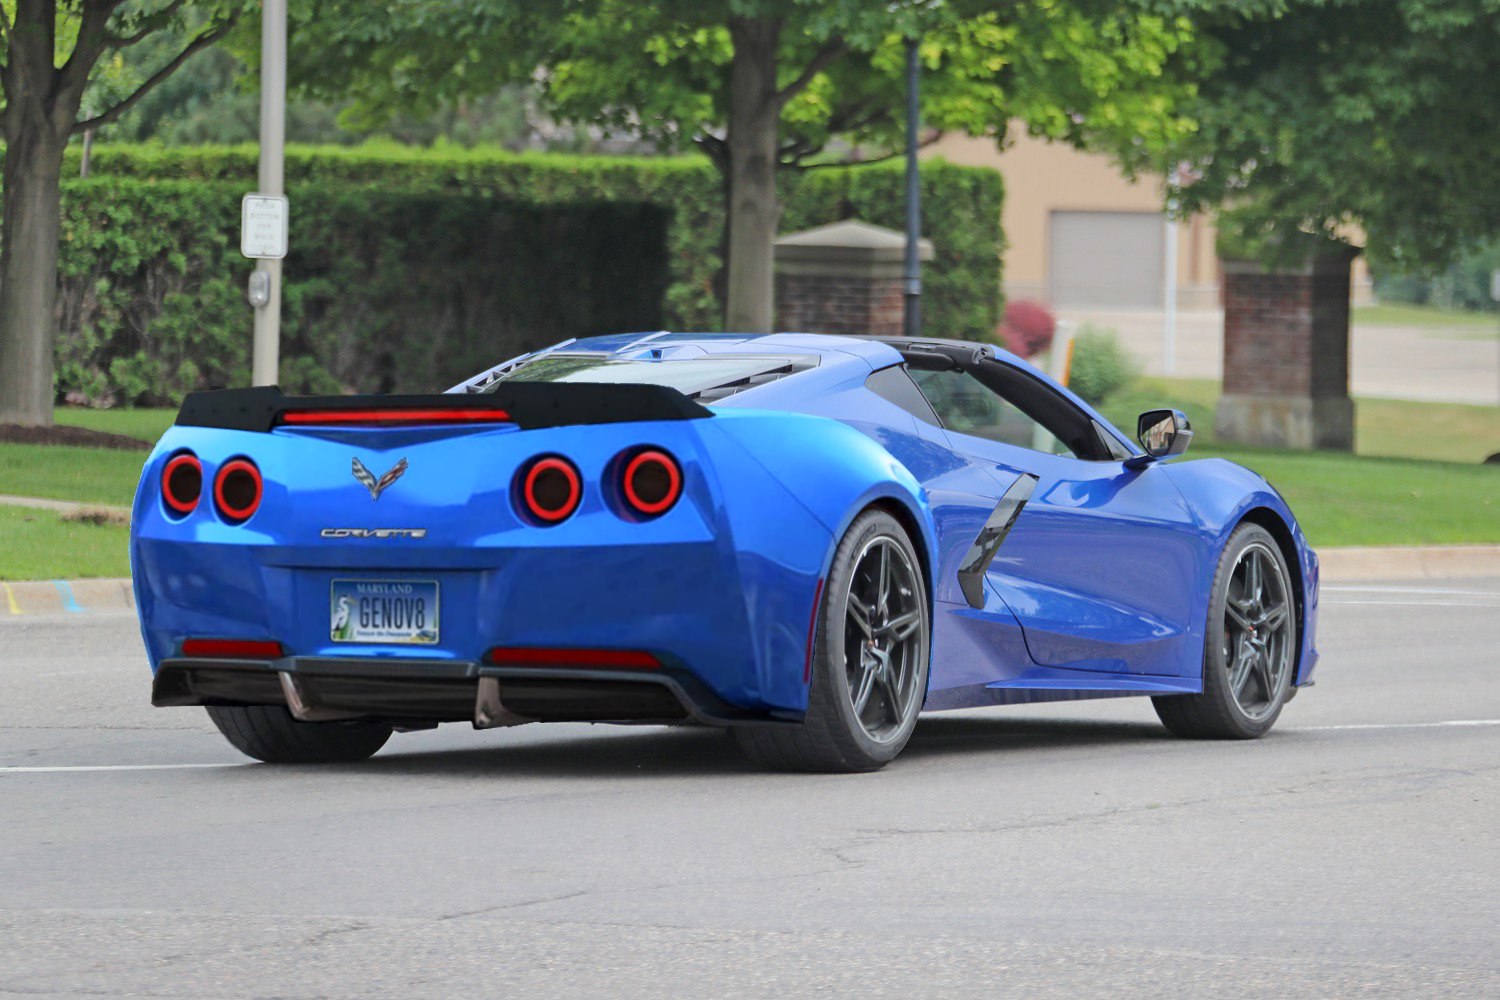 C8 Corvette Reimagined With C7 Rear Bumper, Nissan GT-R Round Taillights.